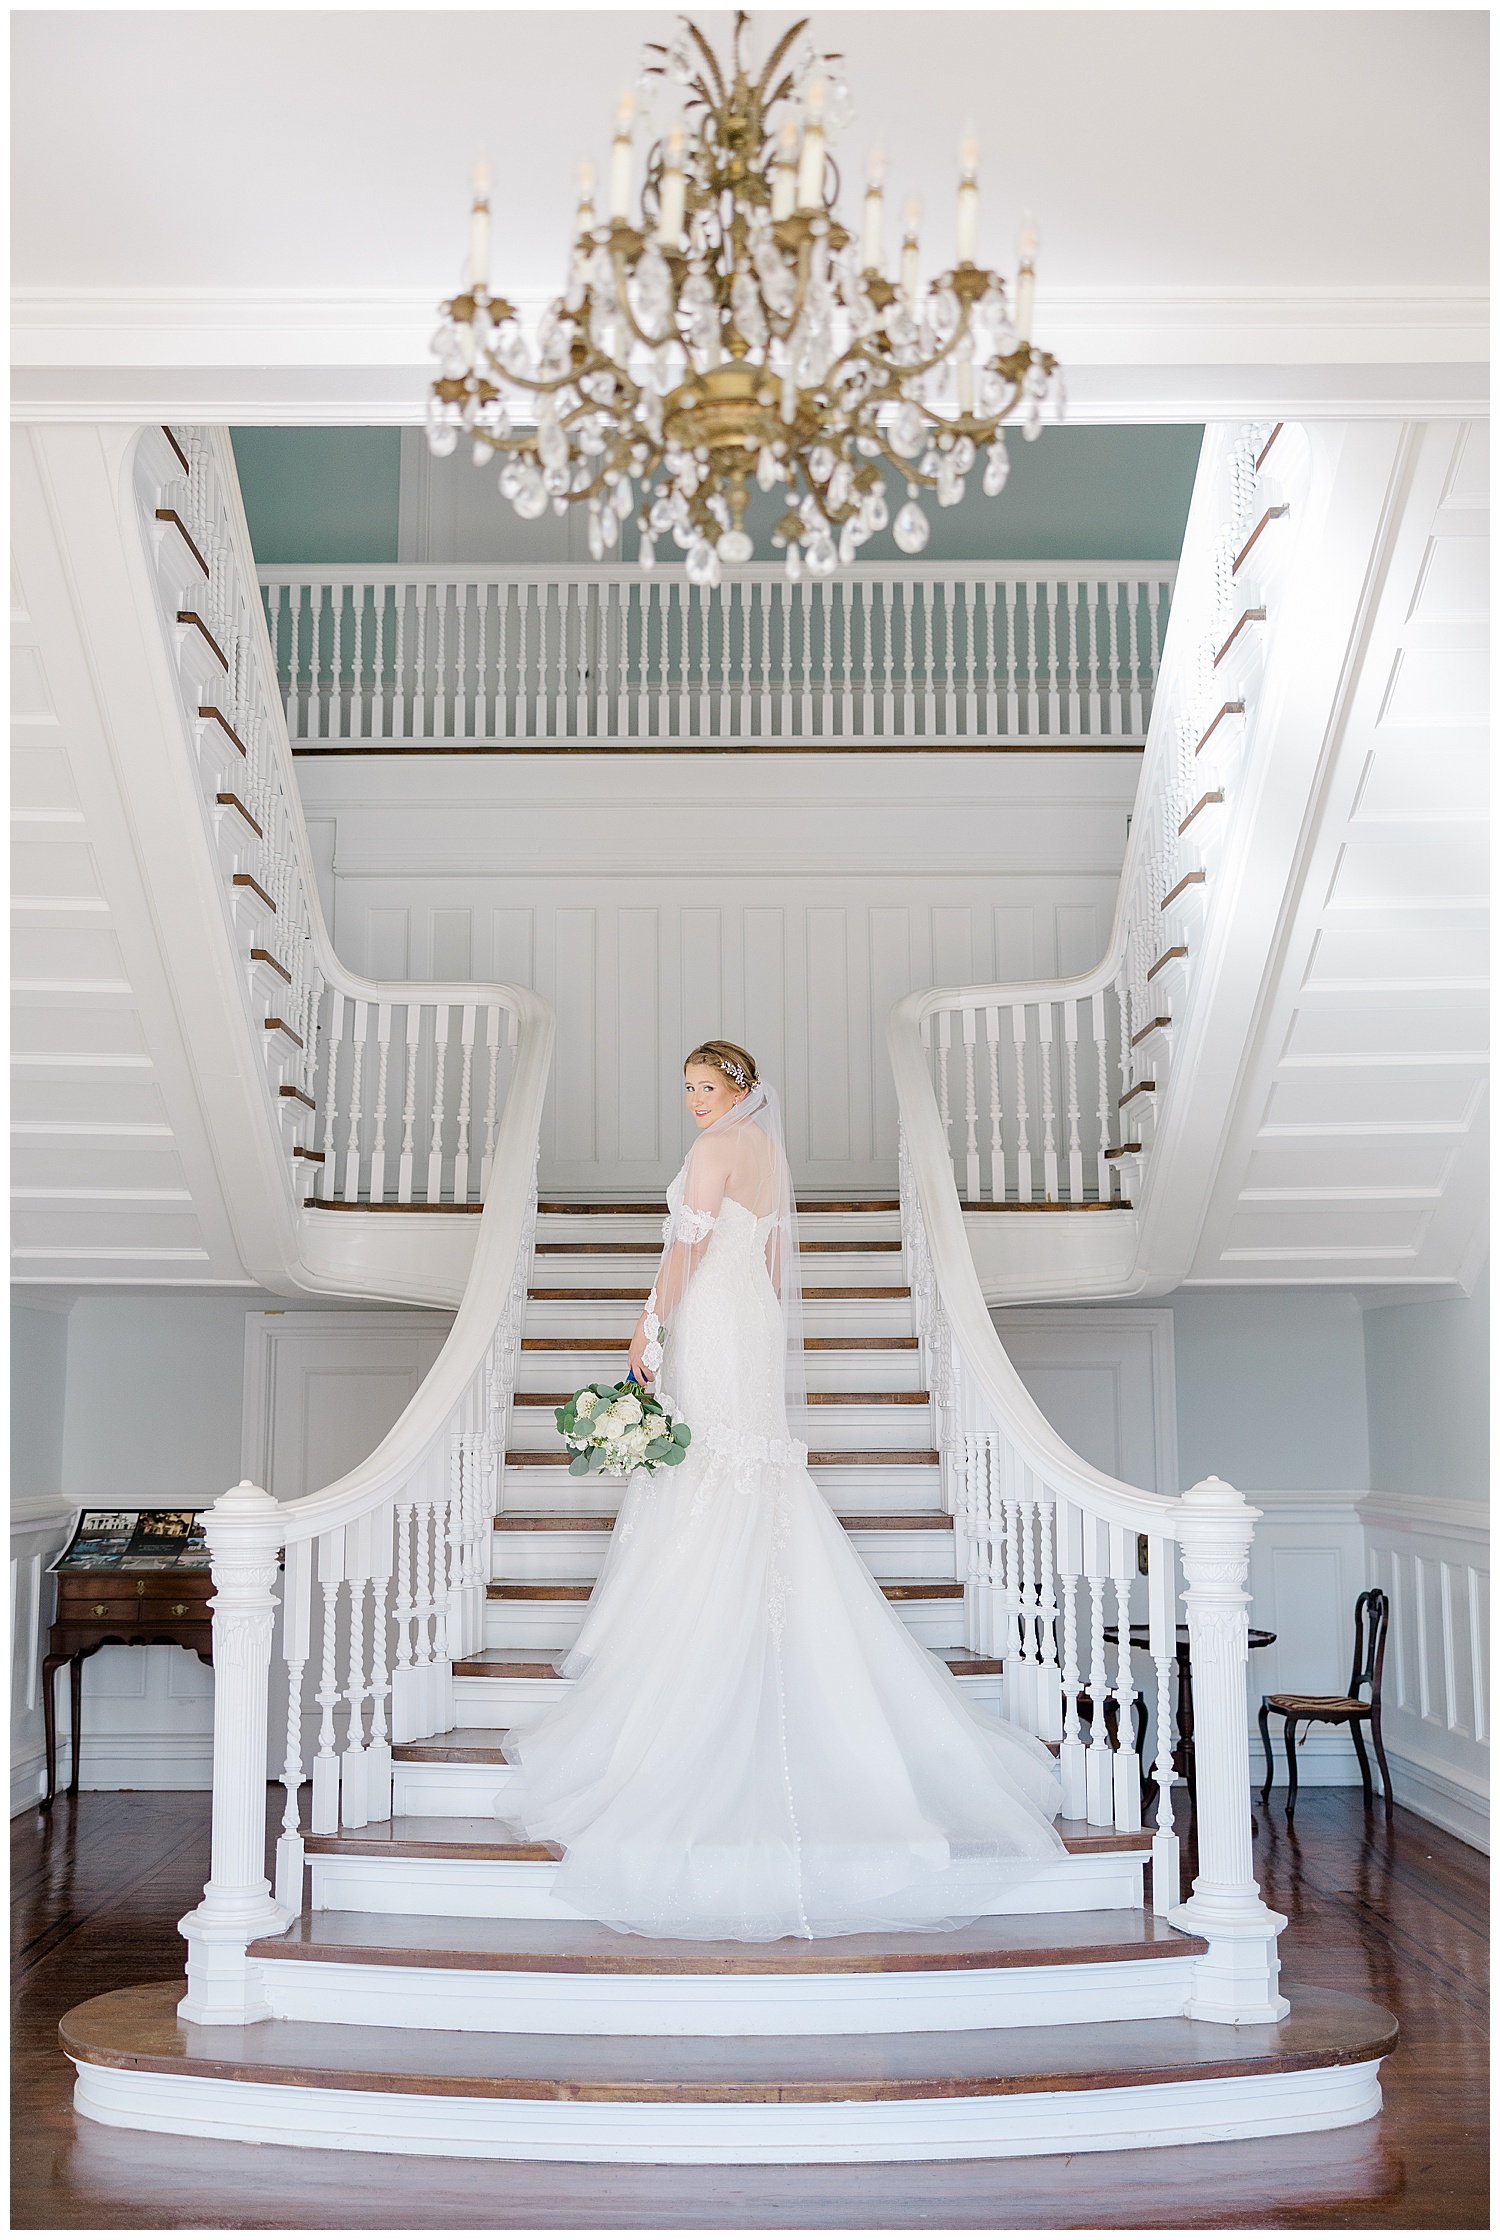 A bride stands on the staircase at Butterfield Mansion.